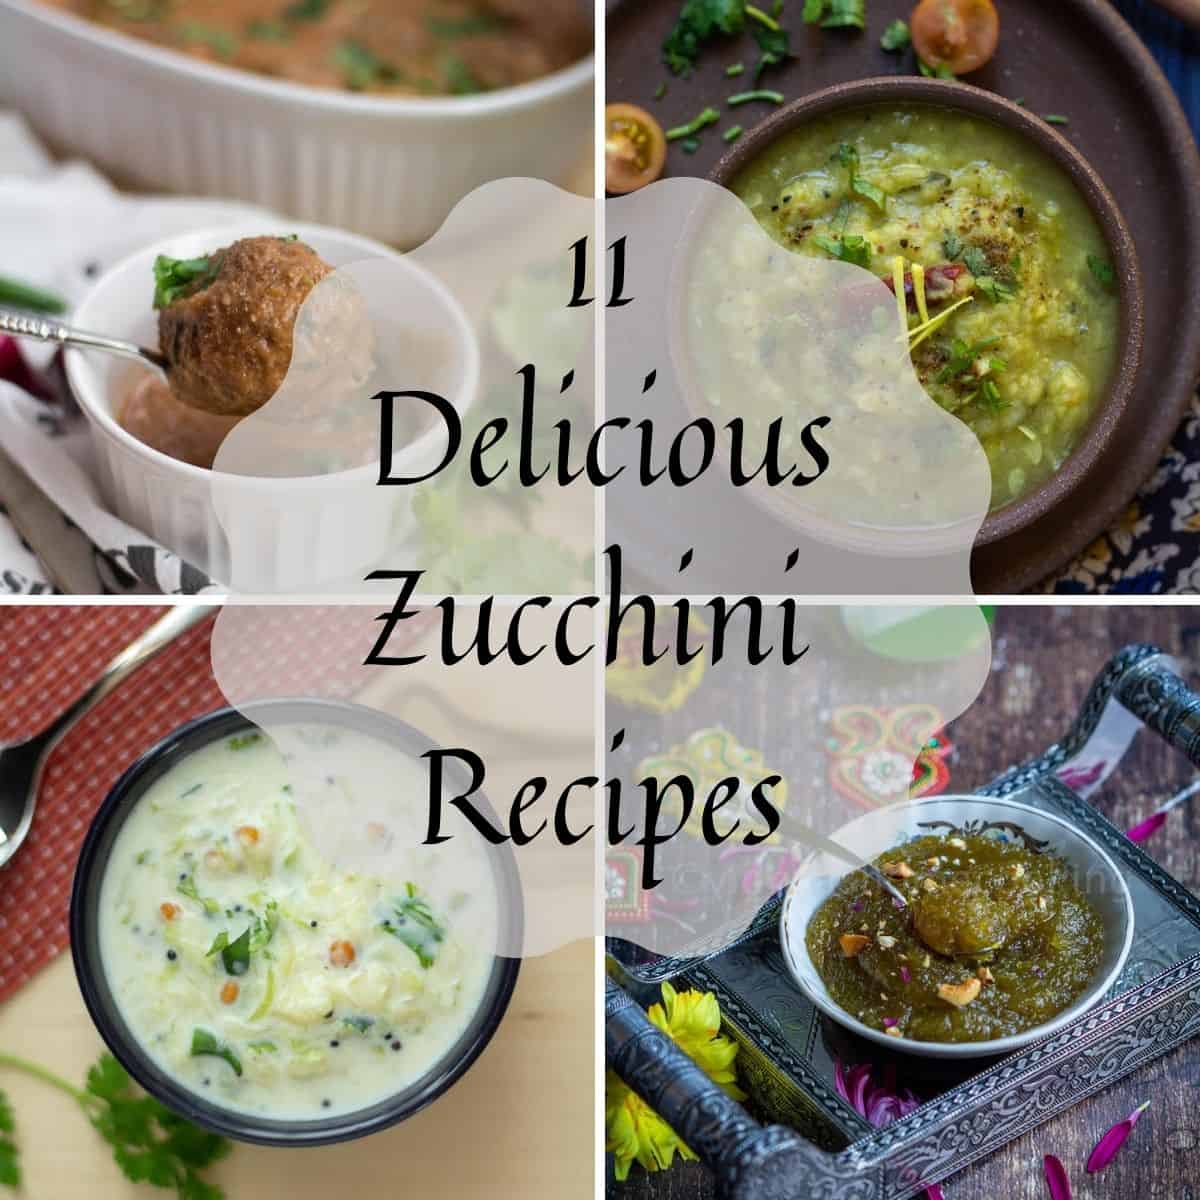 zucchini recipes collage with text overlay